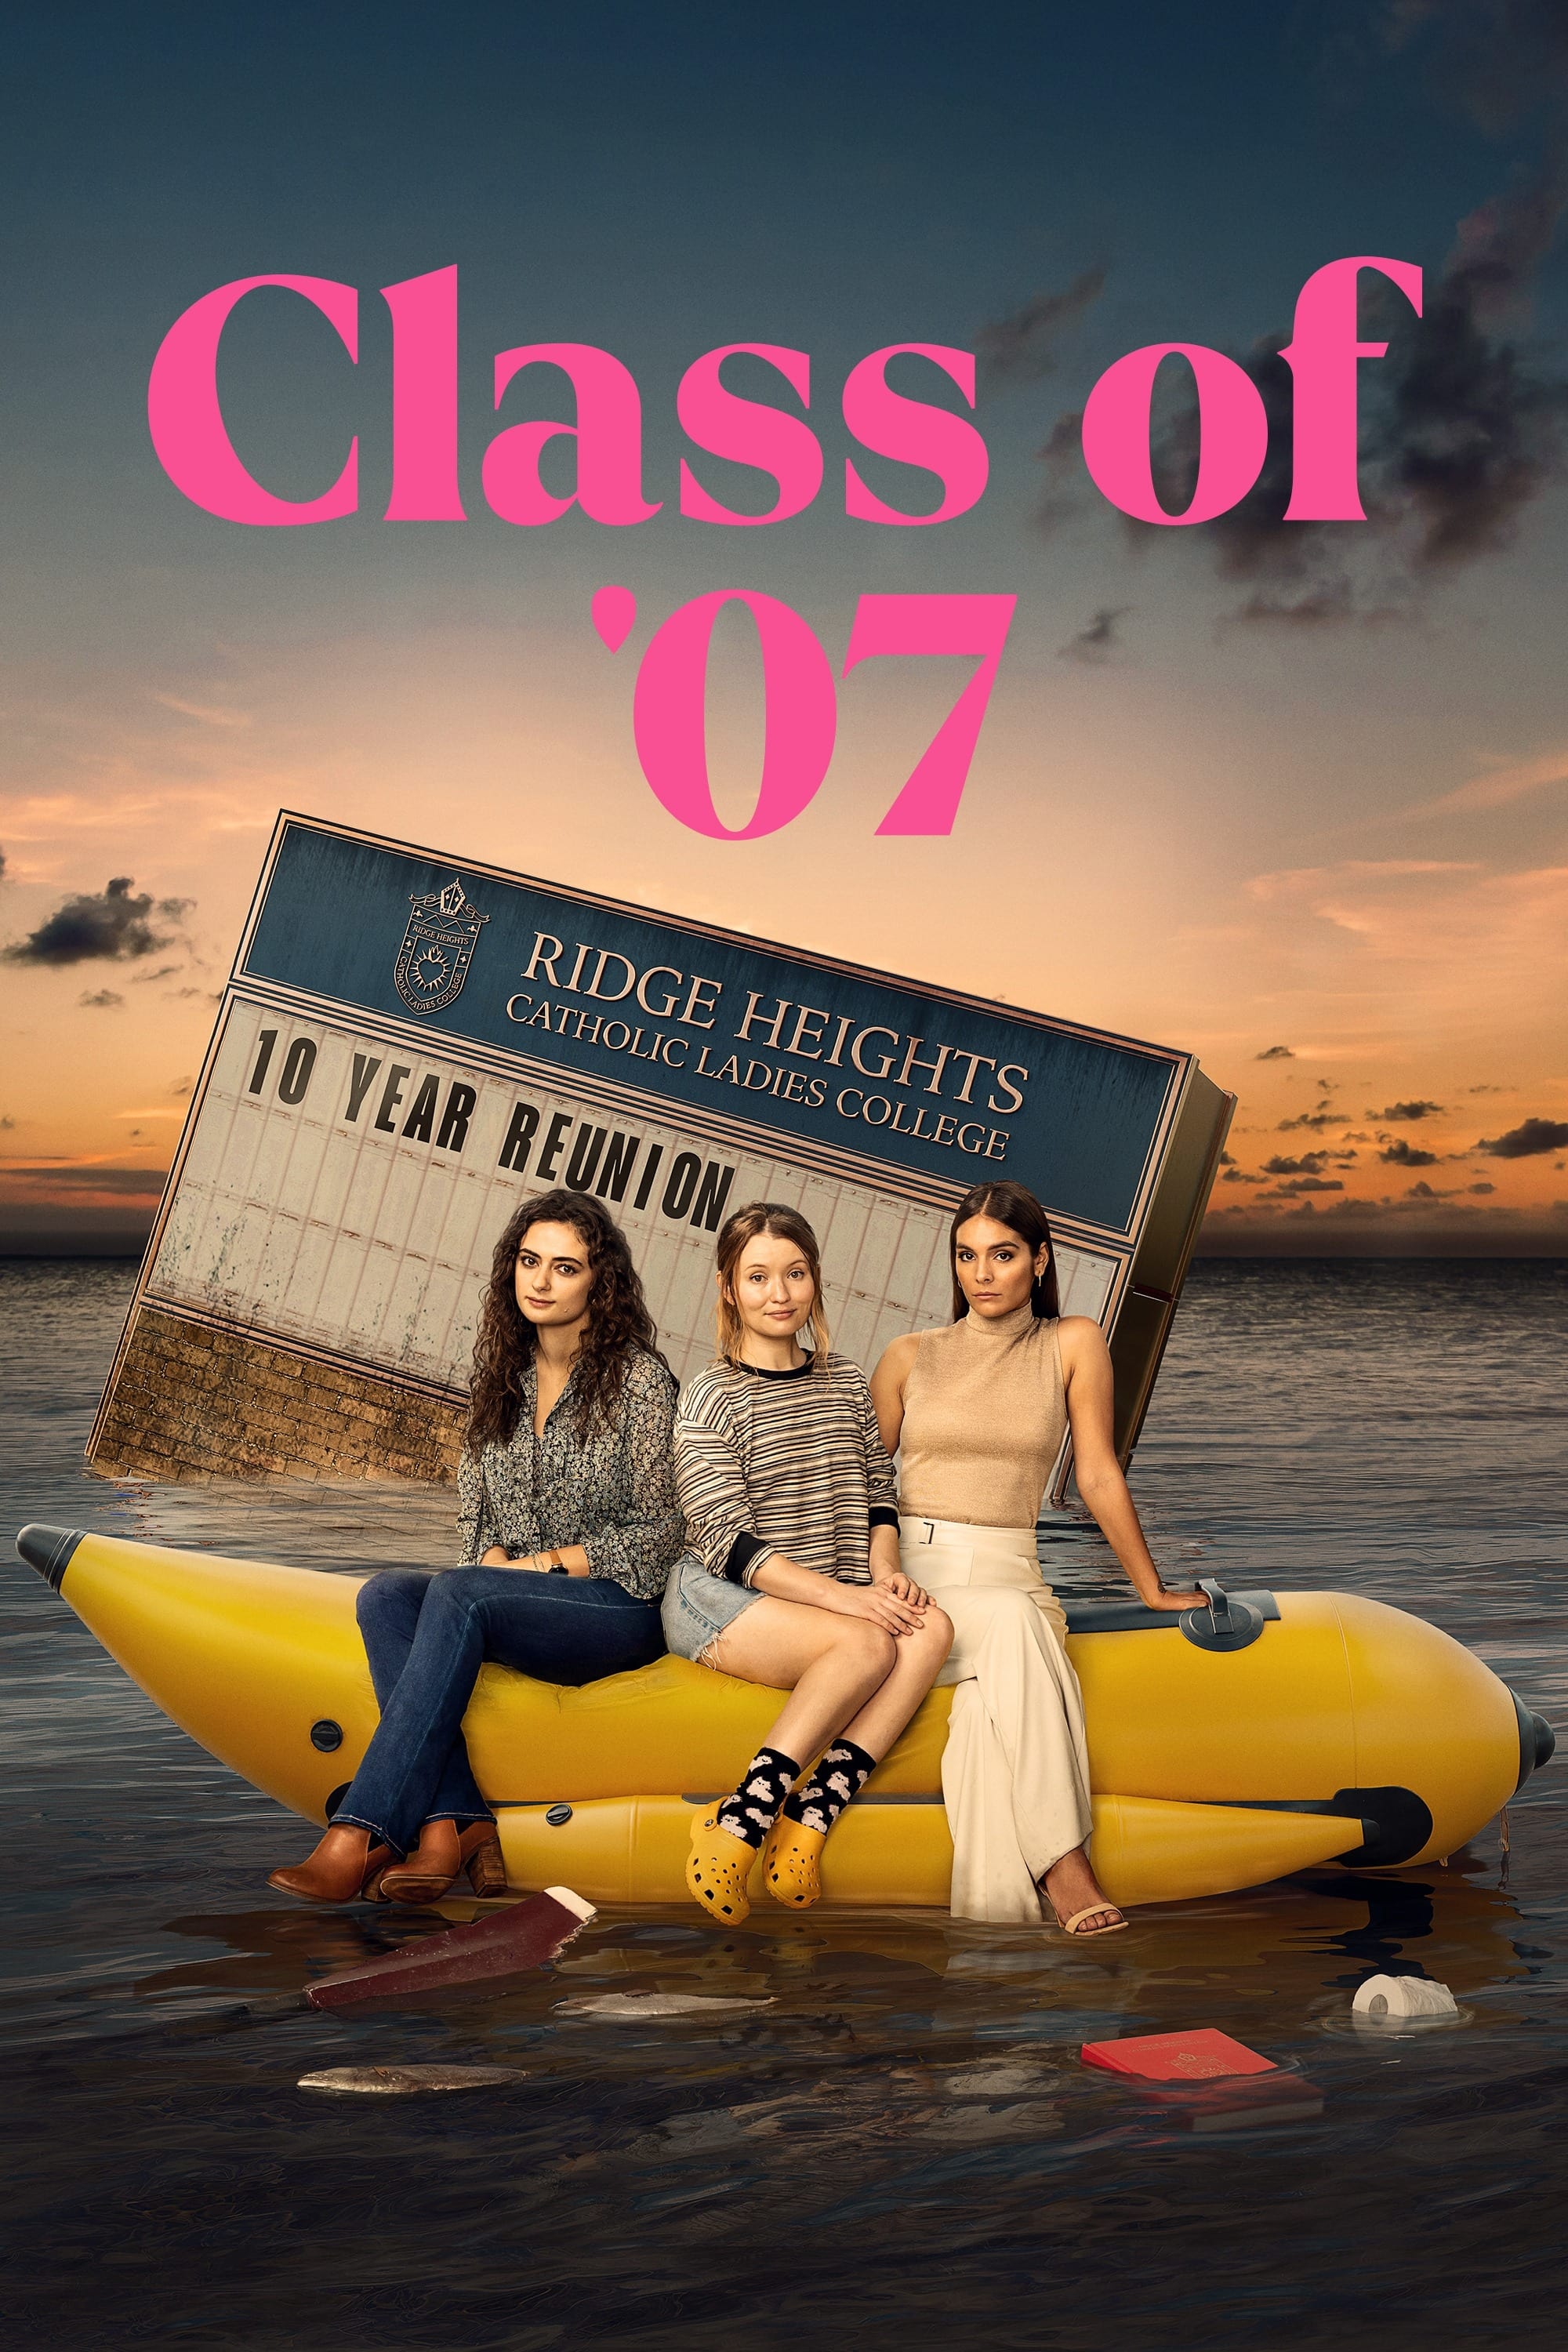 Class of '07 TV Shows About School